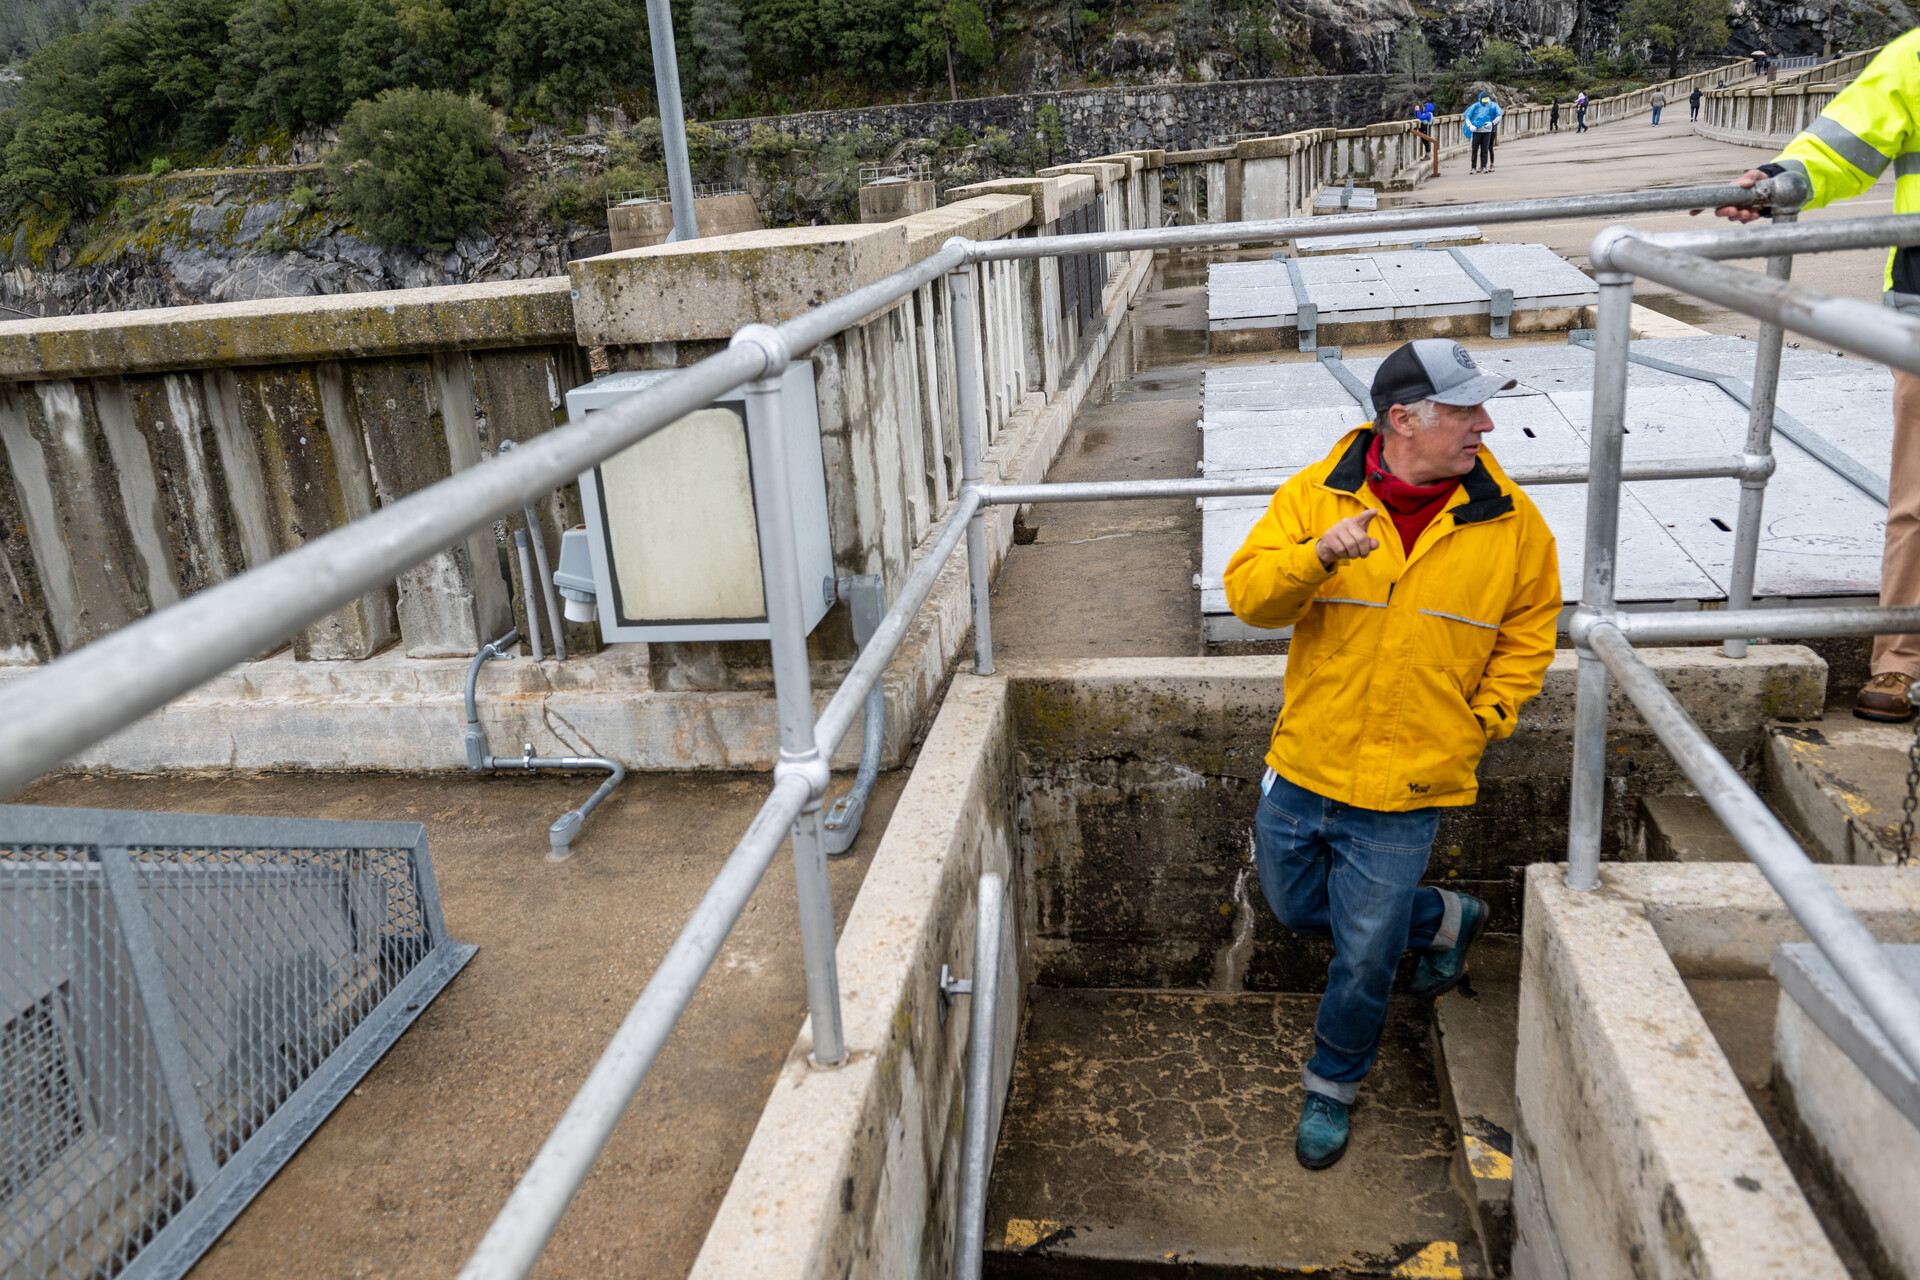 A white man in a bright yellow jacket descends concrete stairs, surrounded by metal pipes, with more concrete and a few trees visible in the far distance across the unseen water surface